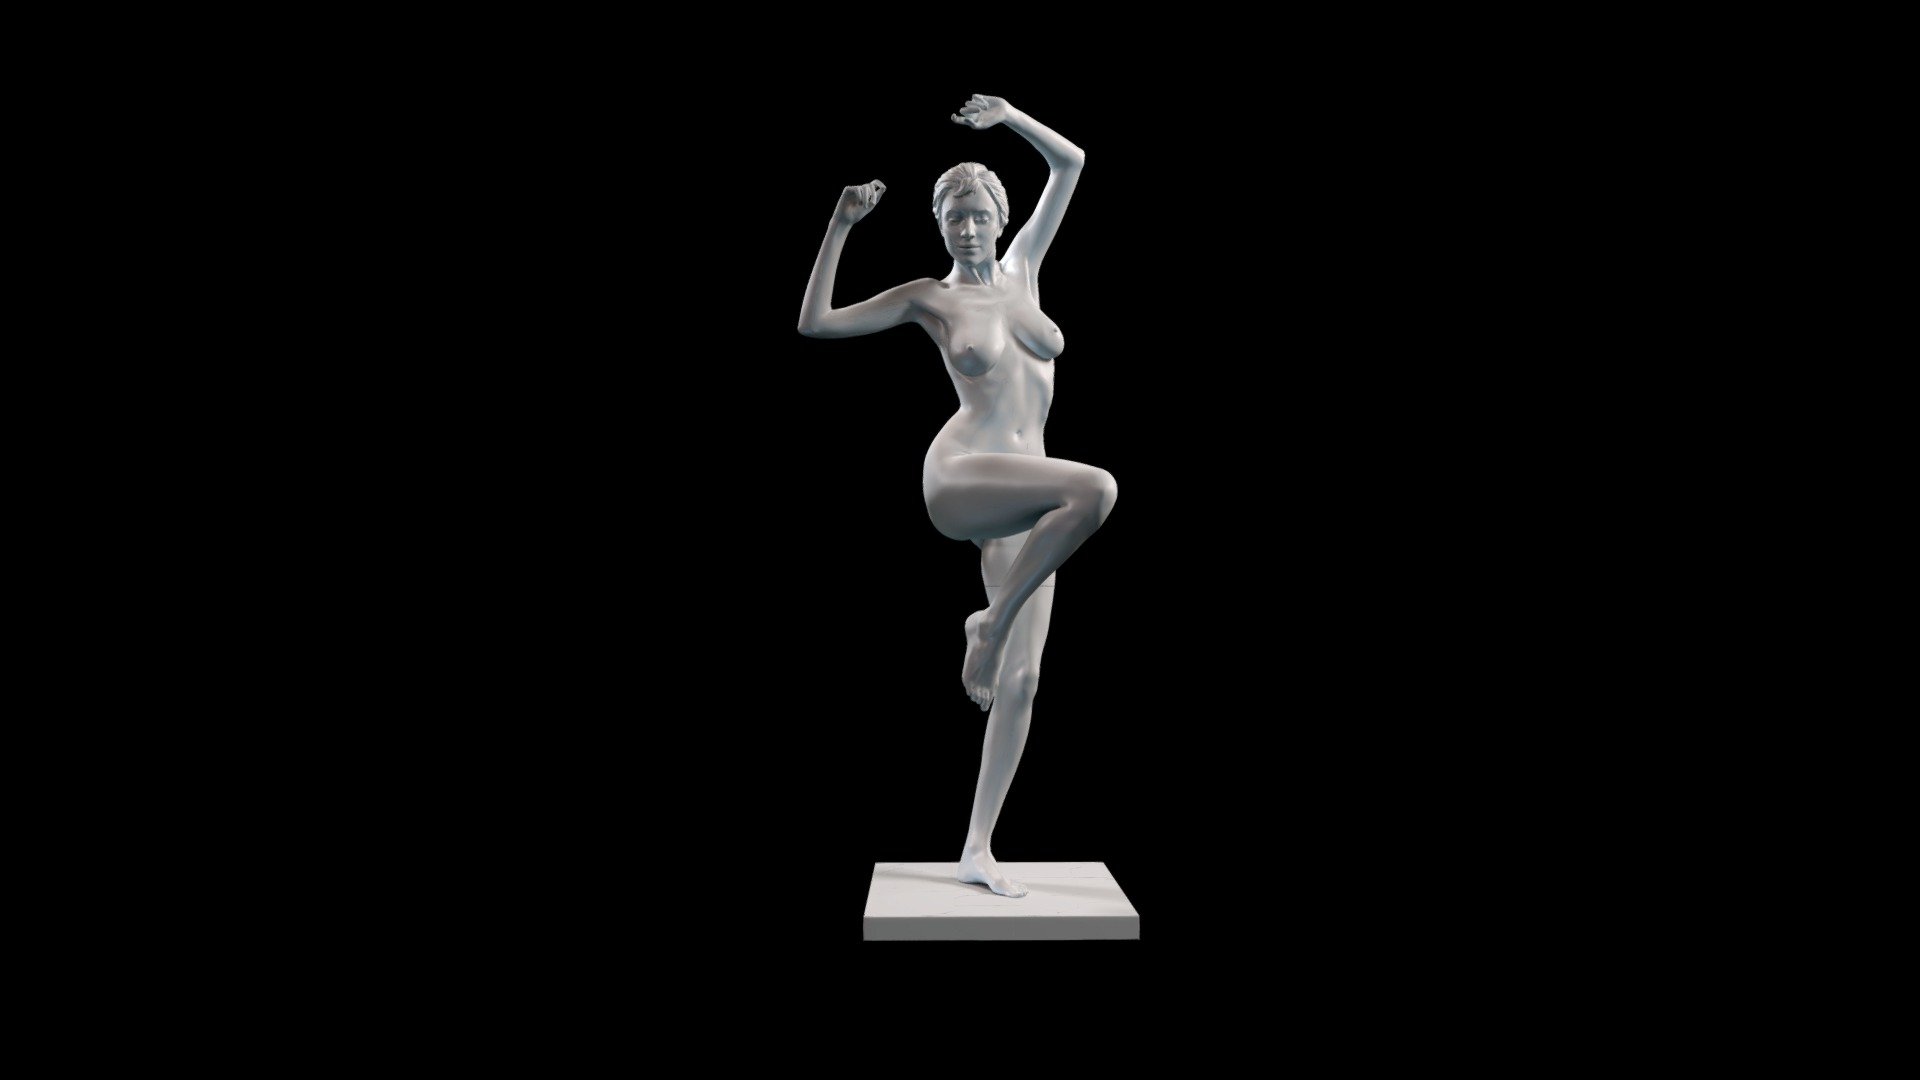 Coline 03-069 - Figurine version

Get your 3D printed sculpture at only-games.co

Other models and poses at another-gallery

This model has been scanned by  another-me.fr - Coline 03-069 - Figurine - 3D model by Another-me (@fredlucazeau) 3d model